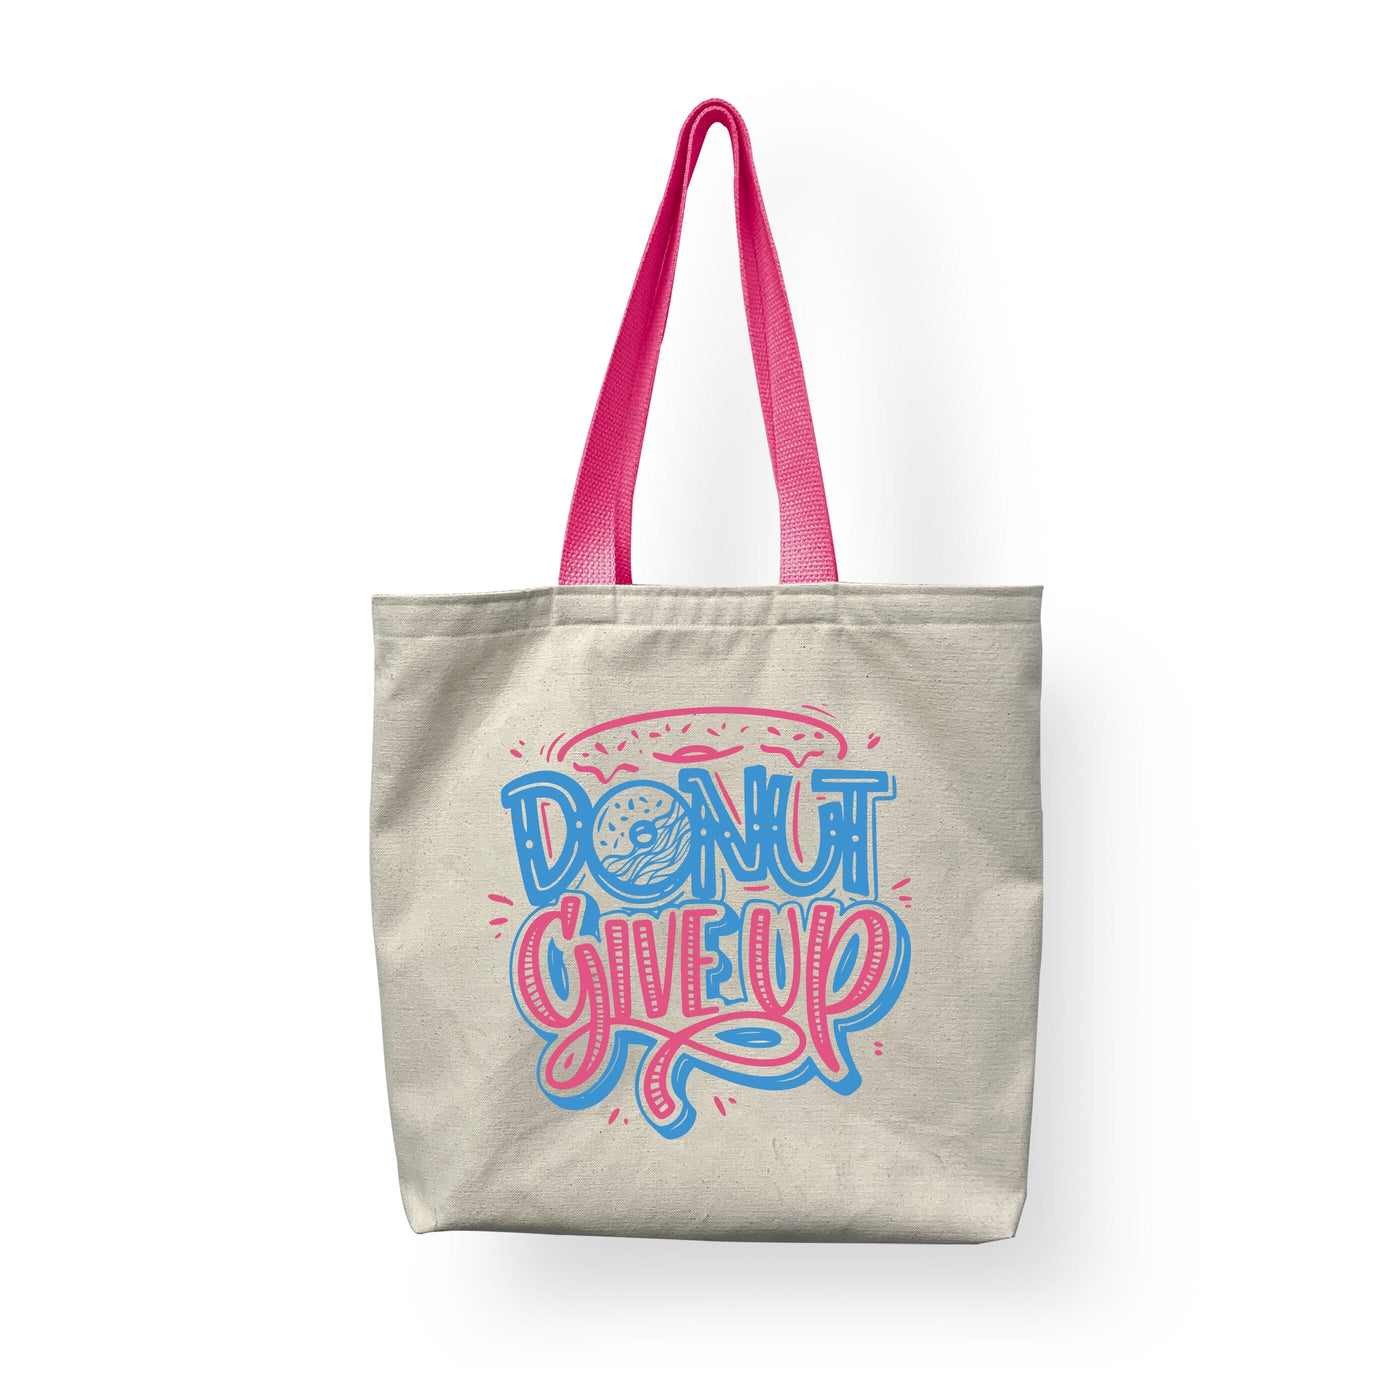 Donut Give Up - Cotton Shopping Tote Bag for Eco-Friendly Shoppers, Teacher Bag, Reusable Tote Bag | Sam and Zoey Fashion Tote Apparel & Accessories Sam + Zoey  Sam + Zoey